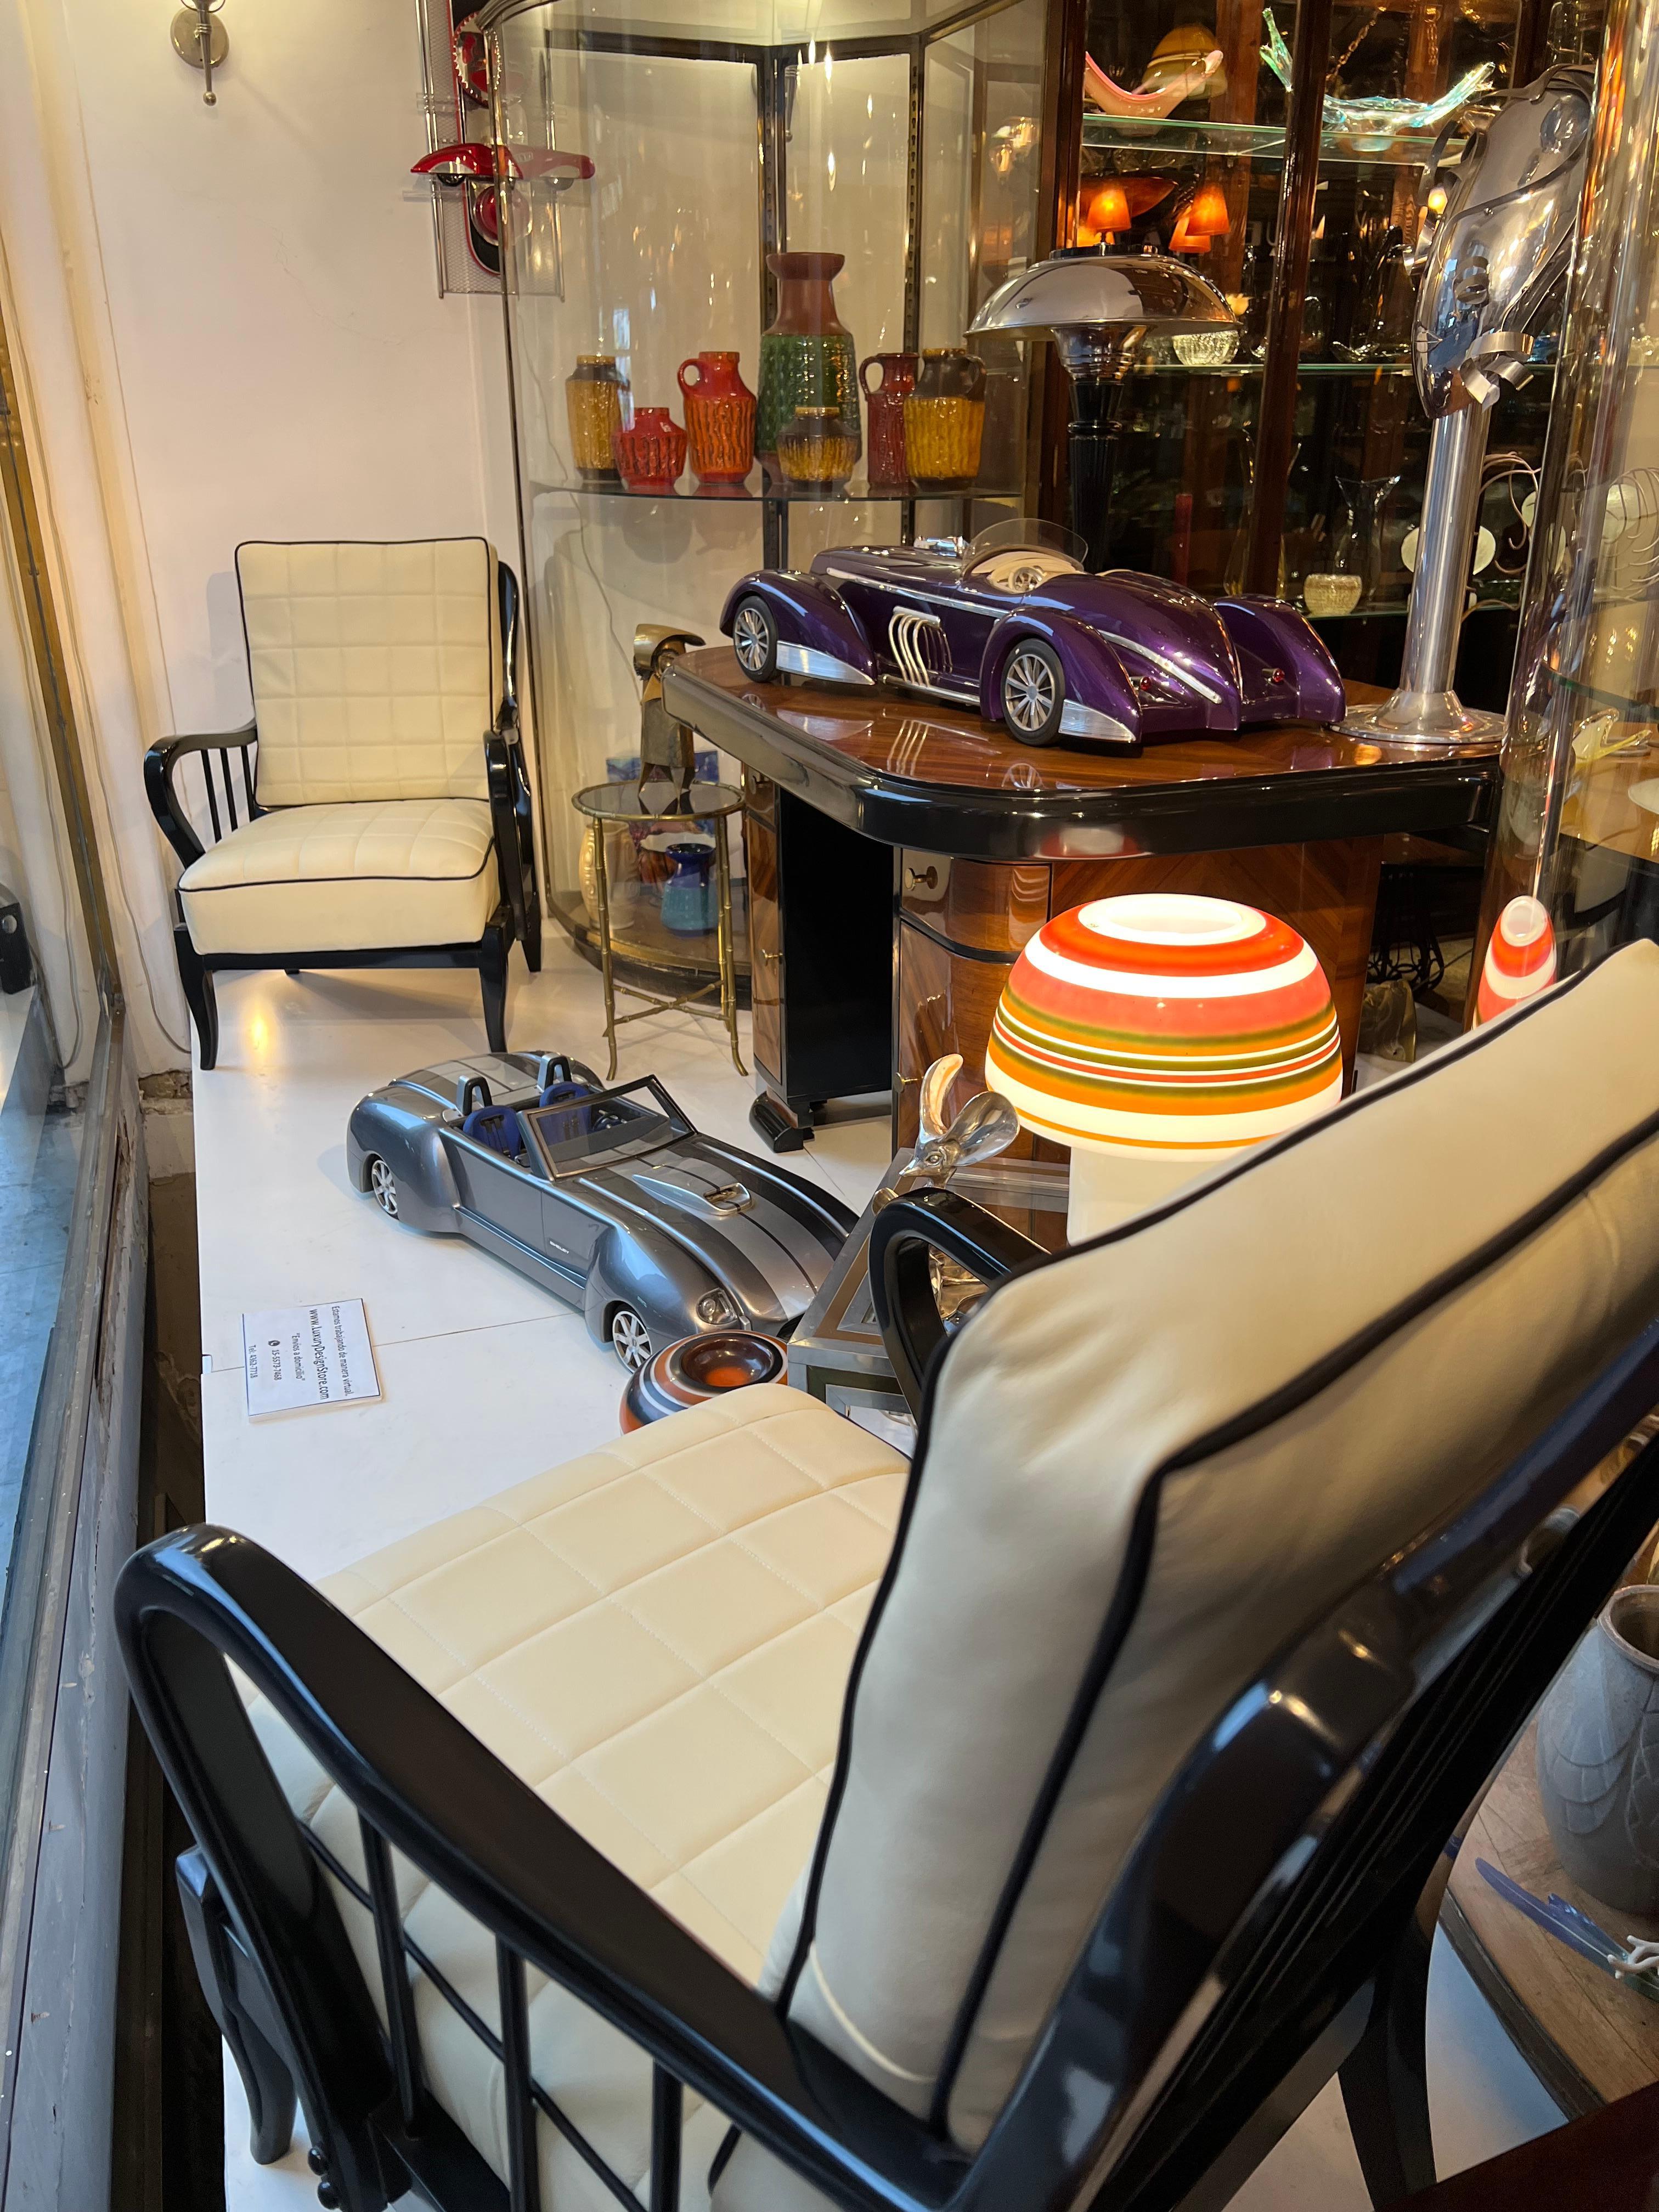 Incredible car: in solid wood. 

We have specialized in the sale of Art Deco and Art Nouveau and Vintage styles since 1982. If you have any questions we are at your disposal.
Pushing the button that reads 'View All From Seller'. And you can see more